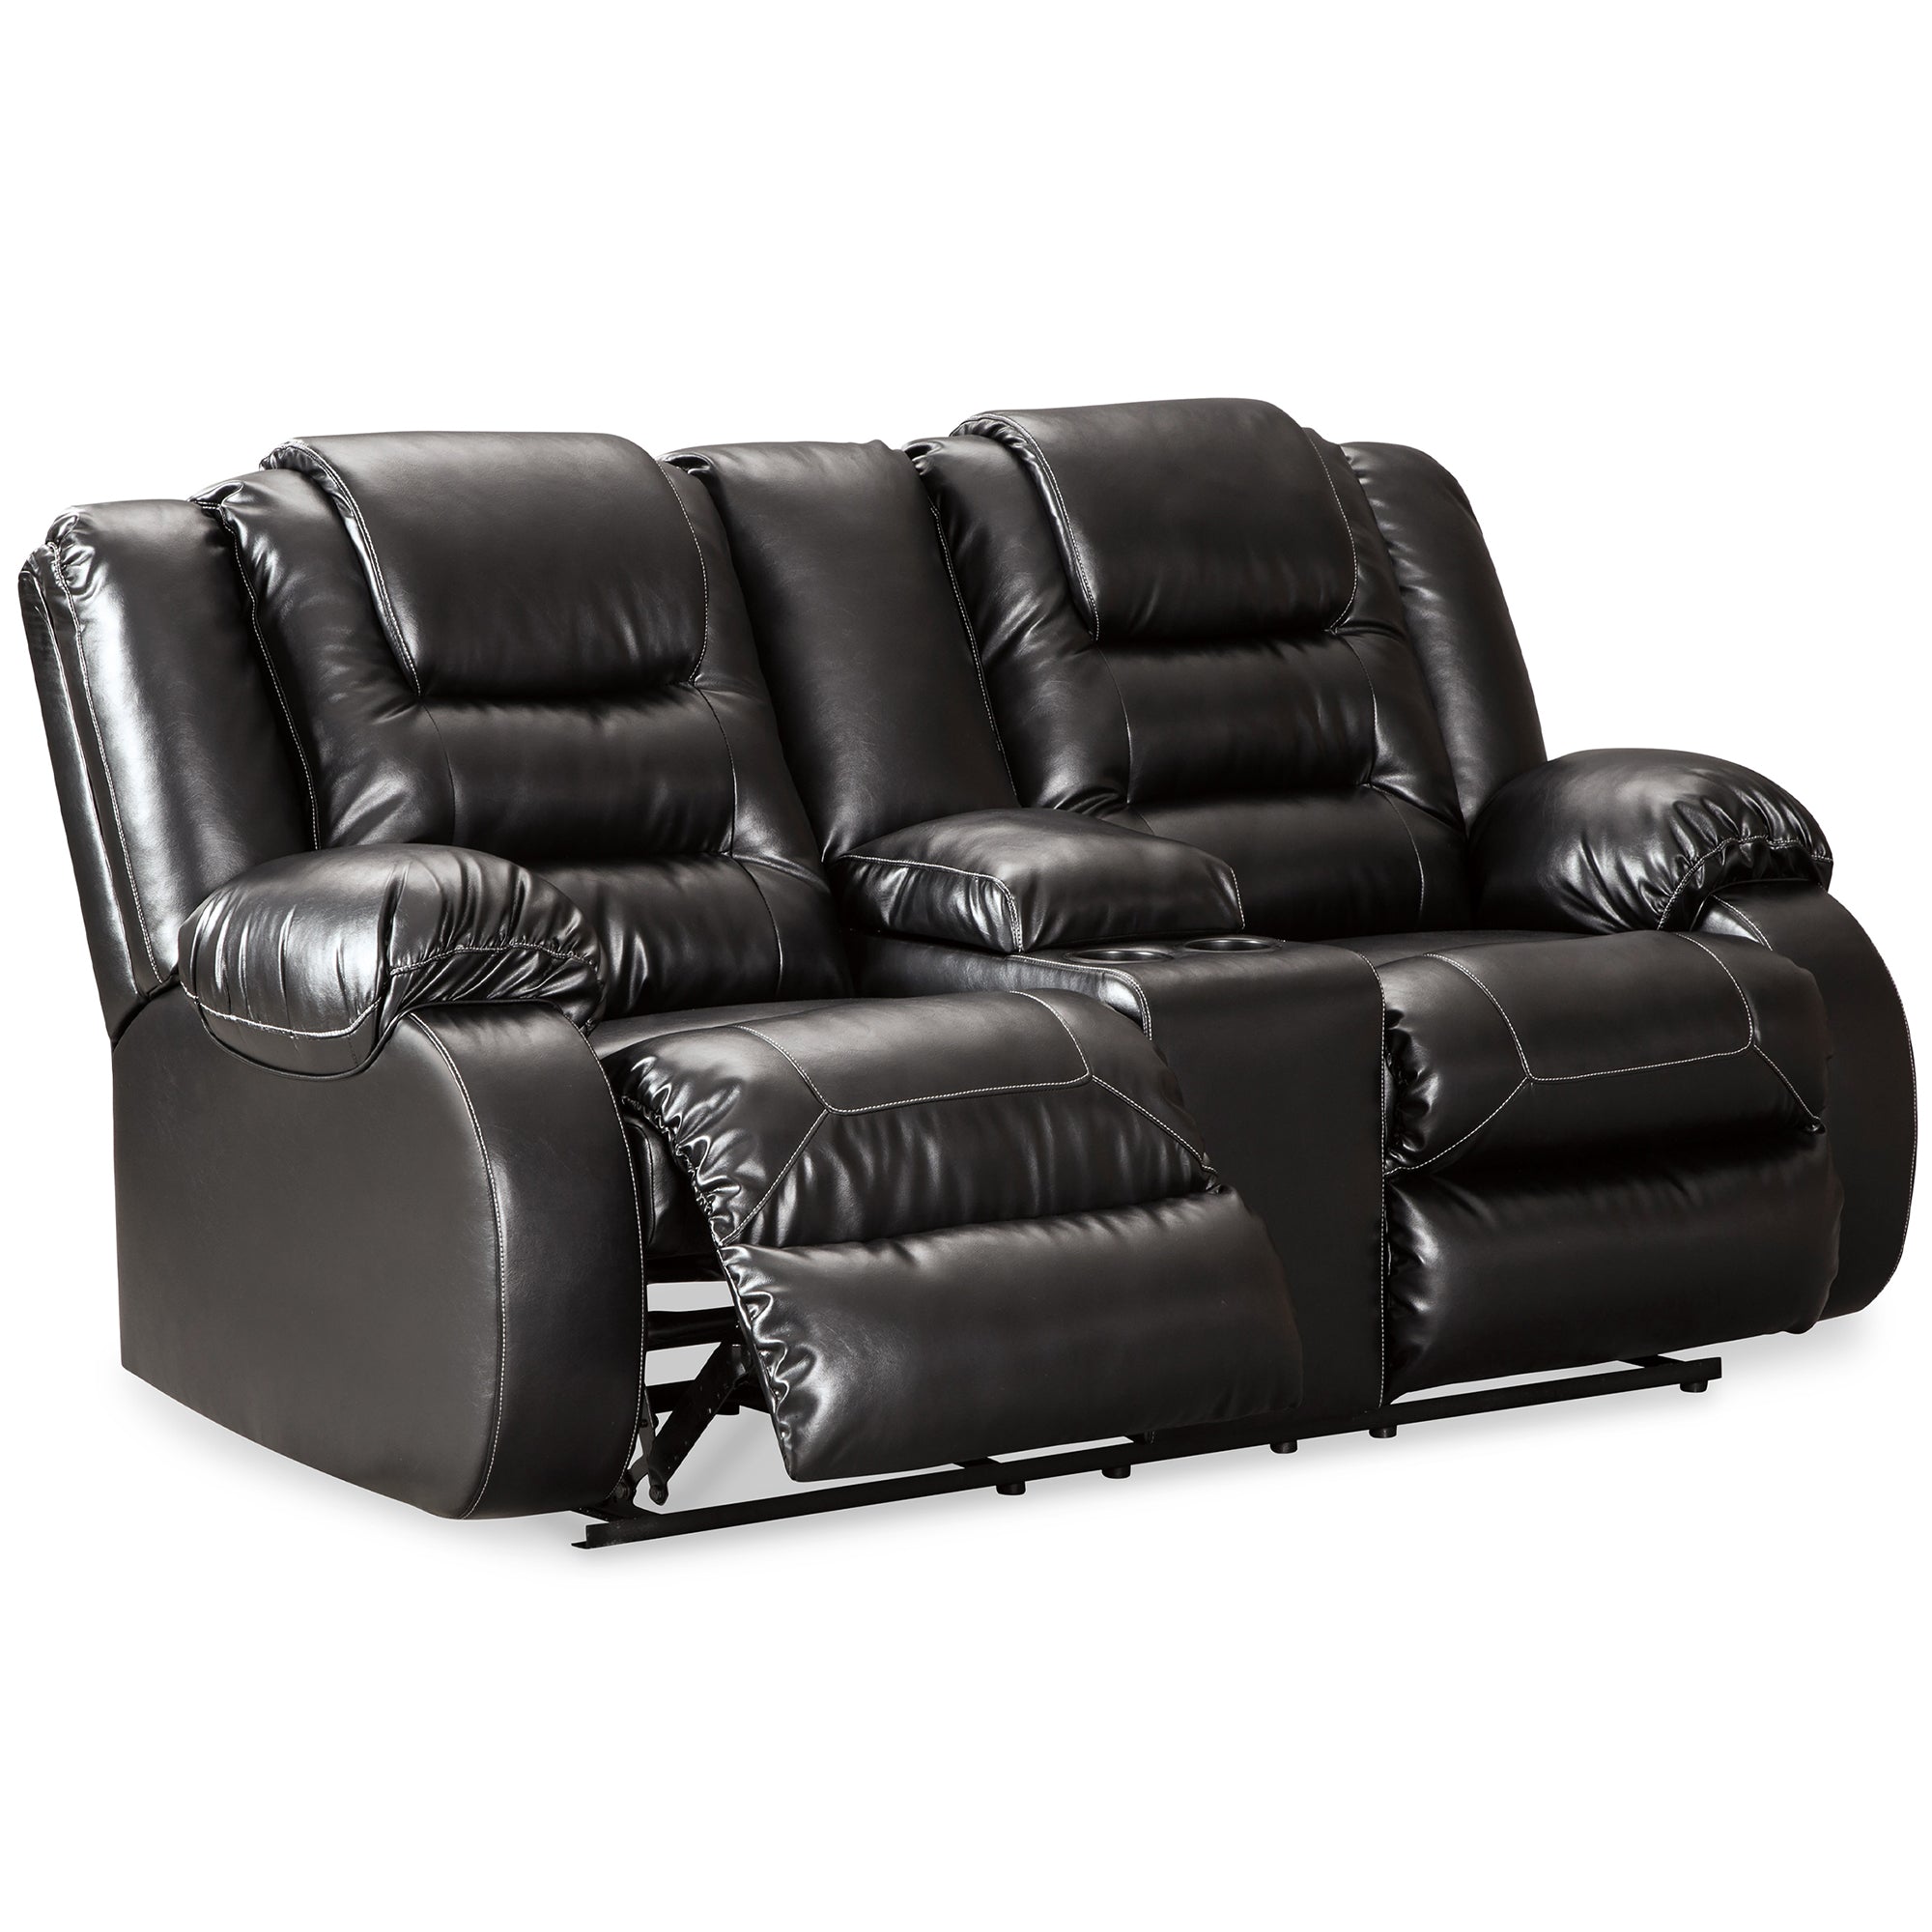 Vacherie Reclining Loveseat with Console in Black